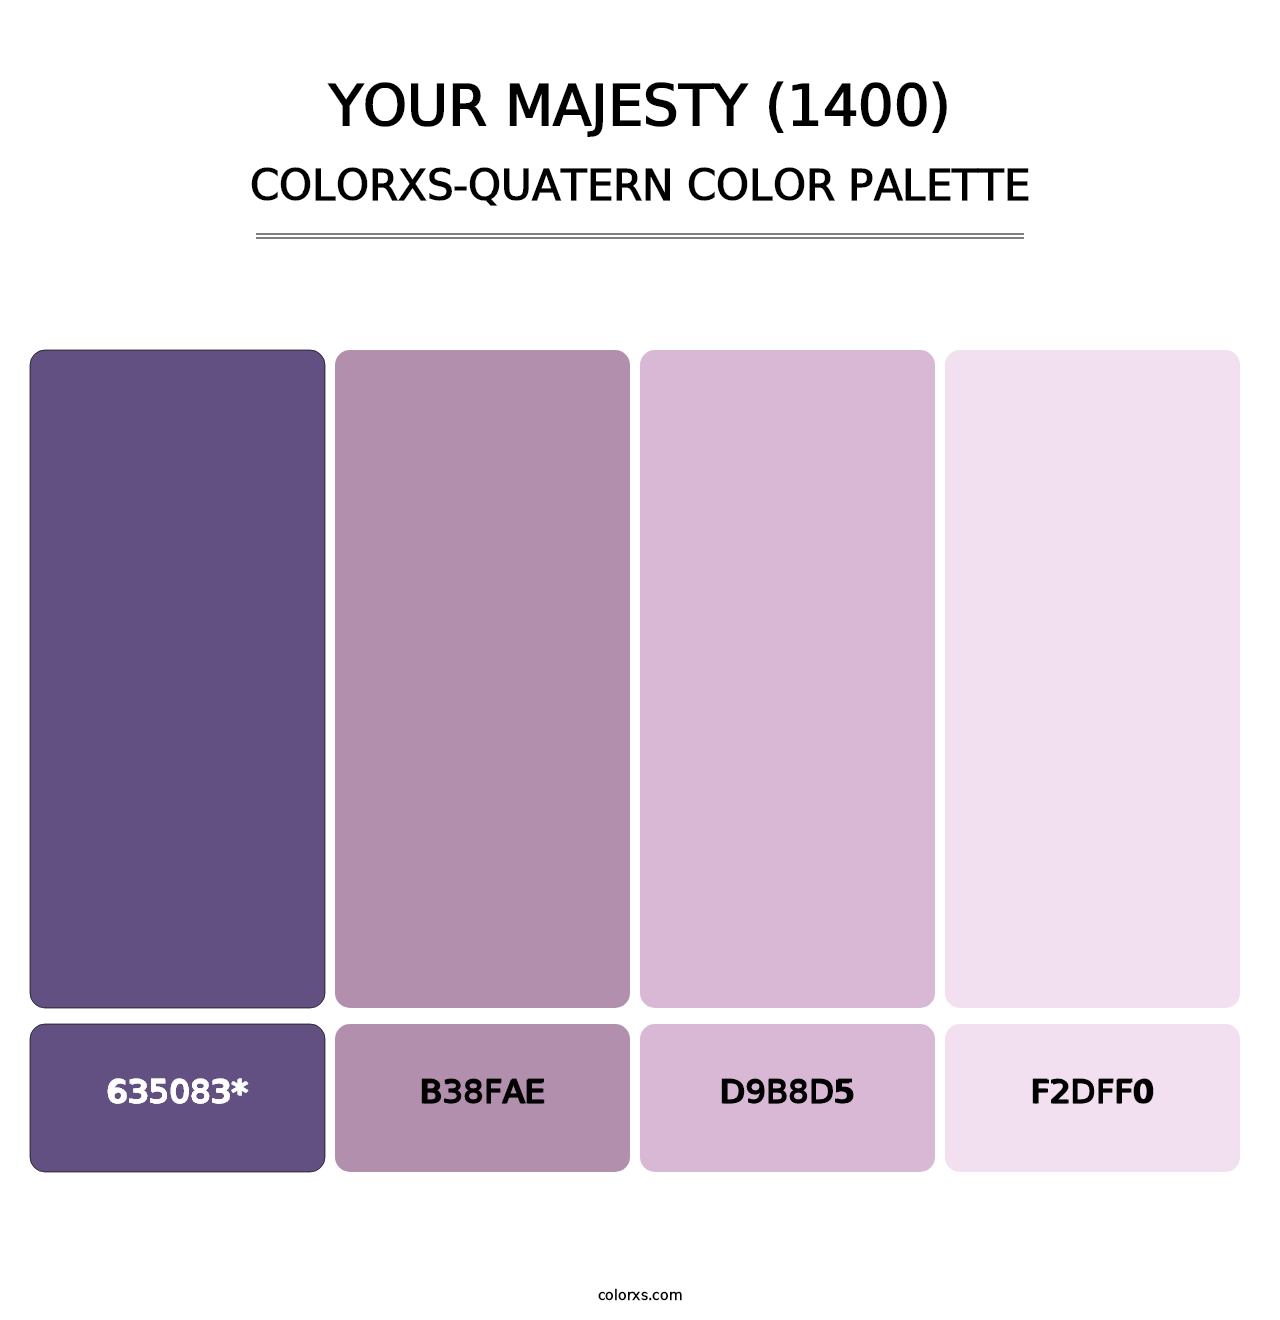 Your Majesty (1400) - Colorxs Quatern Palette